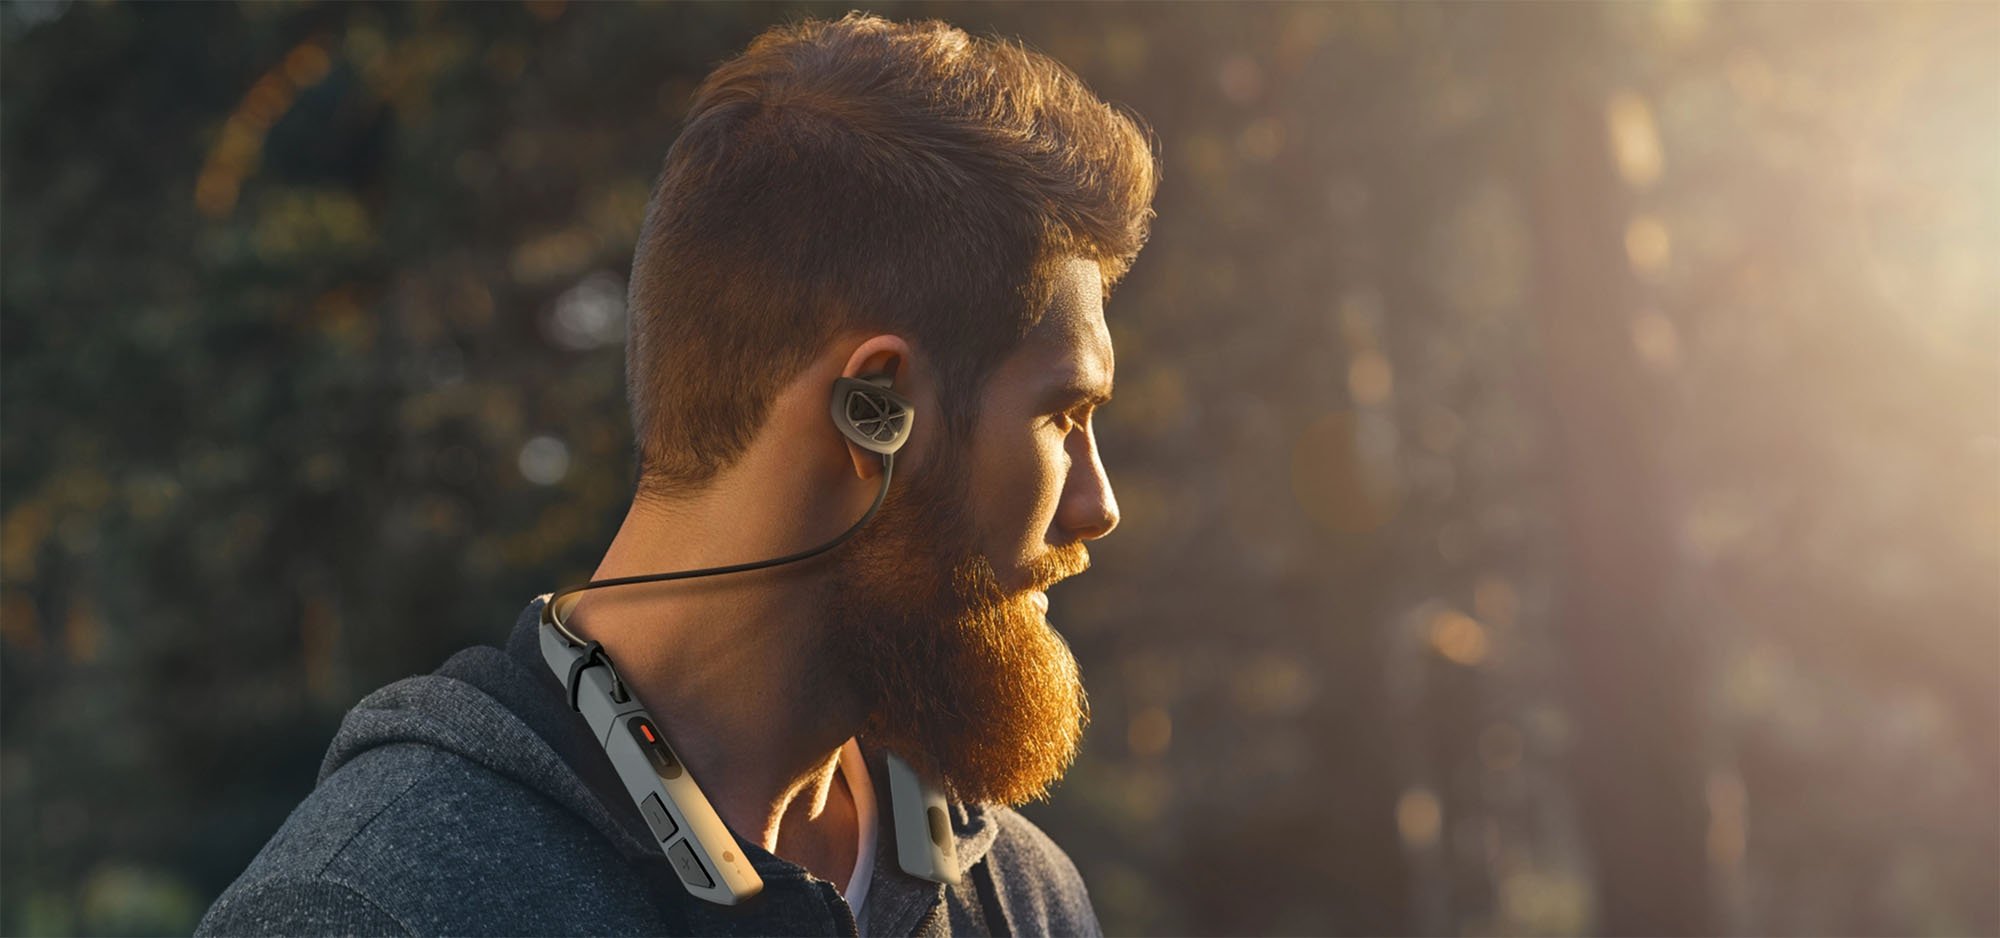 man with beard wearing CLEAR 360 ear protection headset in outdoor setting